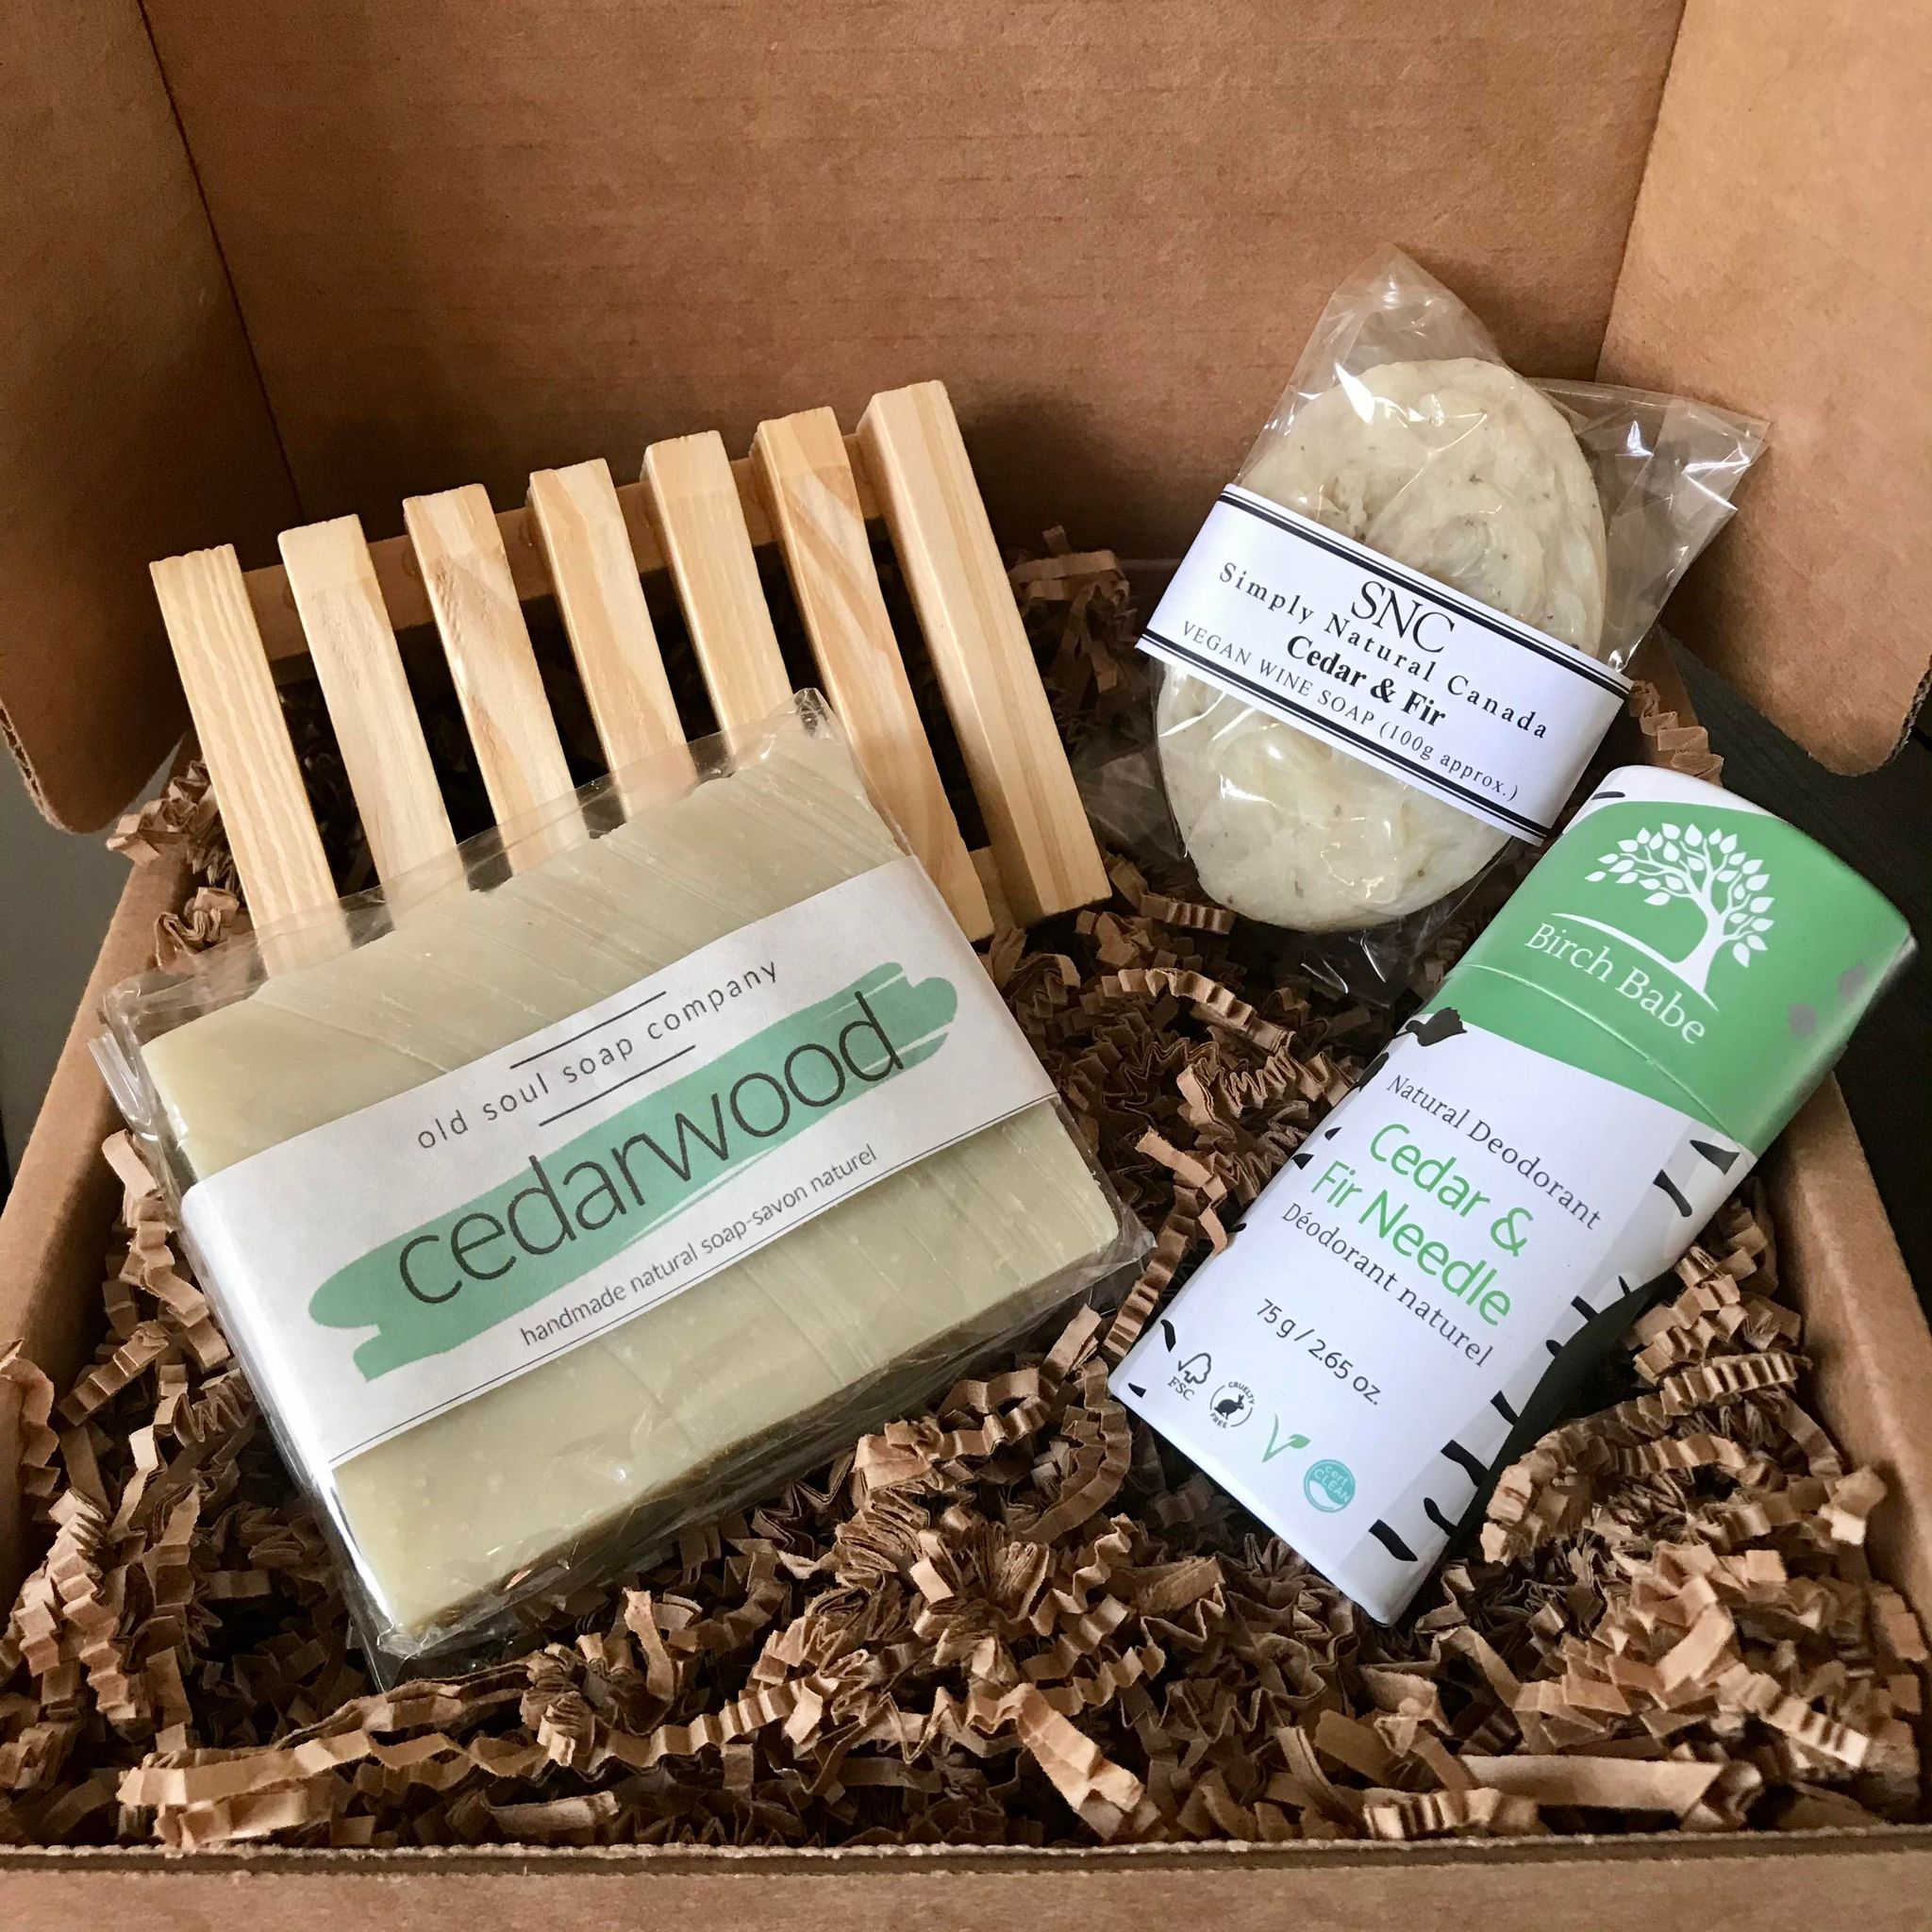 Included in this gift box is a cedarwood vegan soap from the Old Soul Soap Company, a wooden soap dish, a cedar & fir vegan wine soap from Simply Natural Canada and a cedar & fir vegan deodorant from Birch Babe.